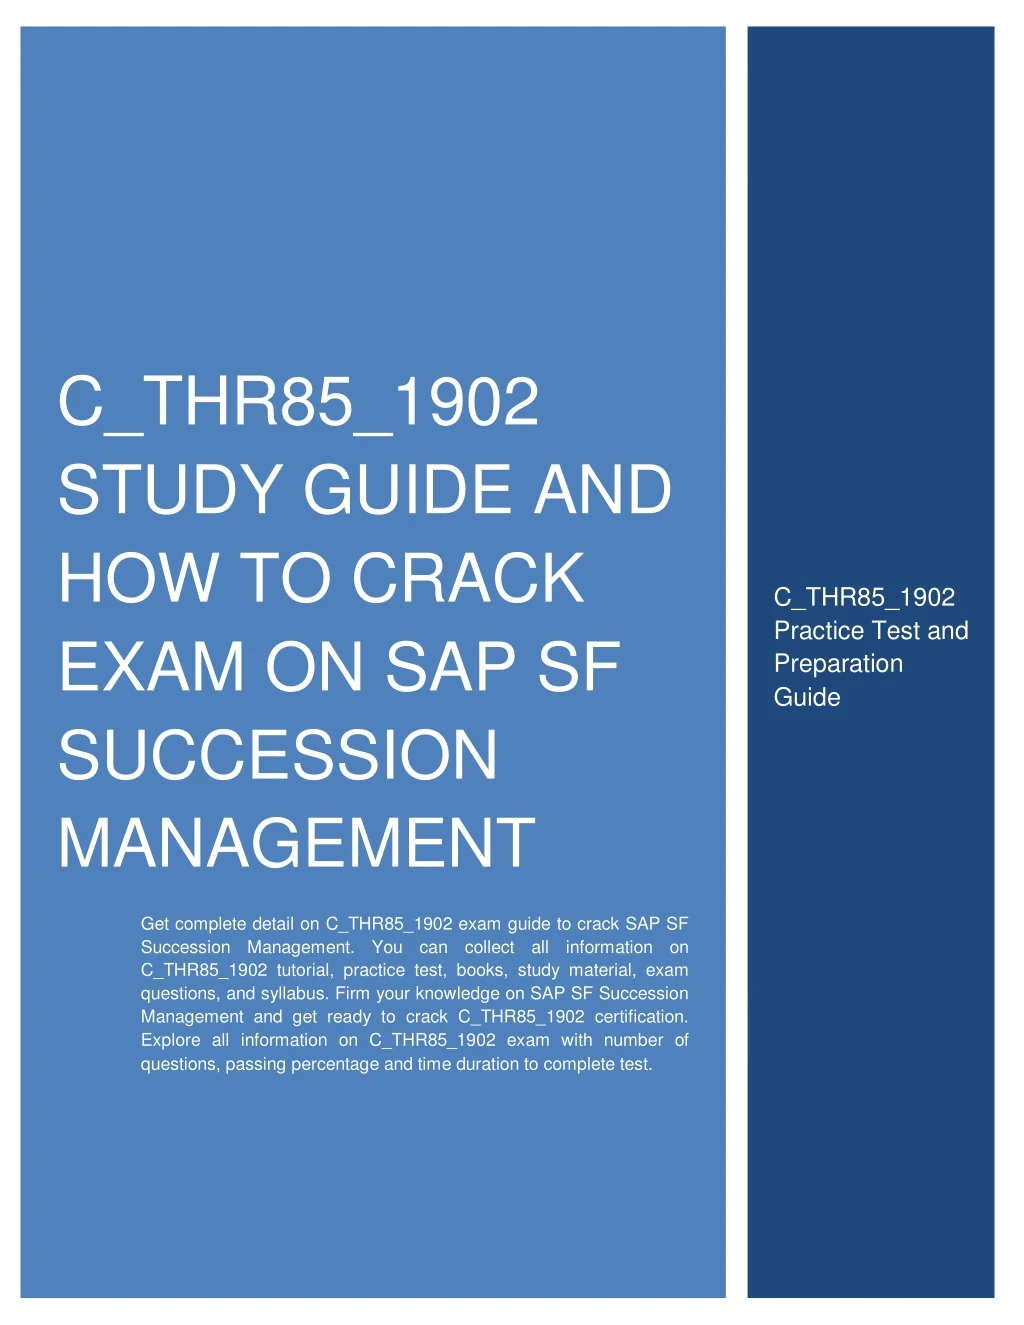 c thr85 1902 study guide and how to crack exam